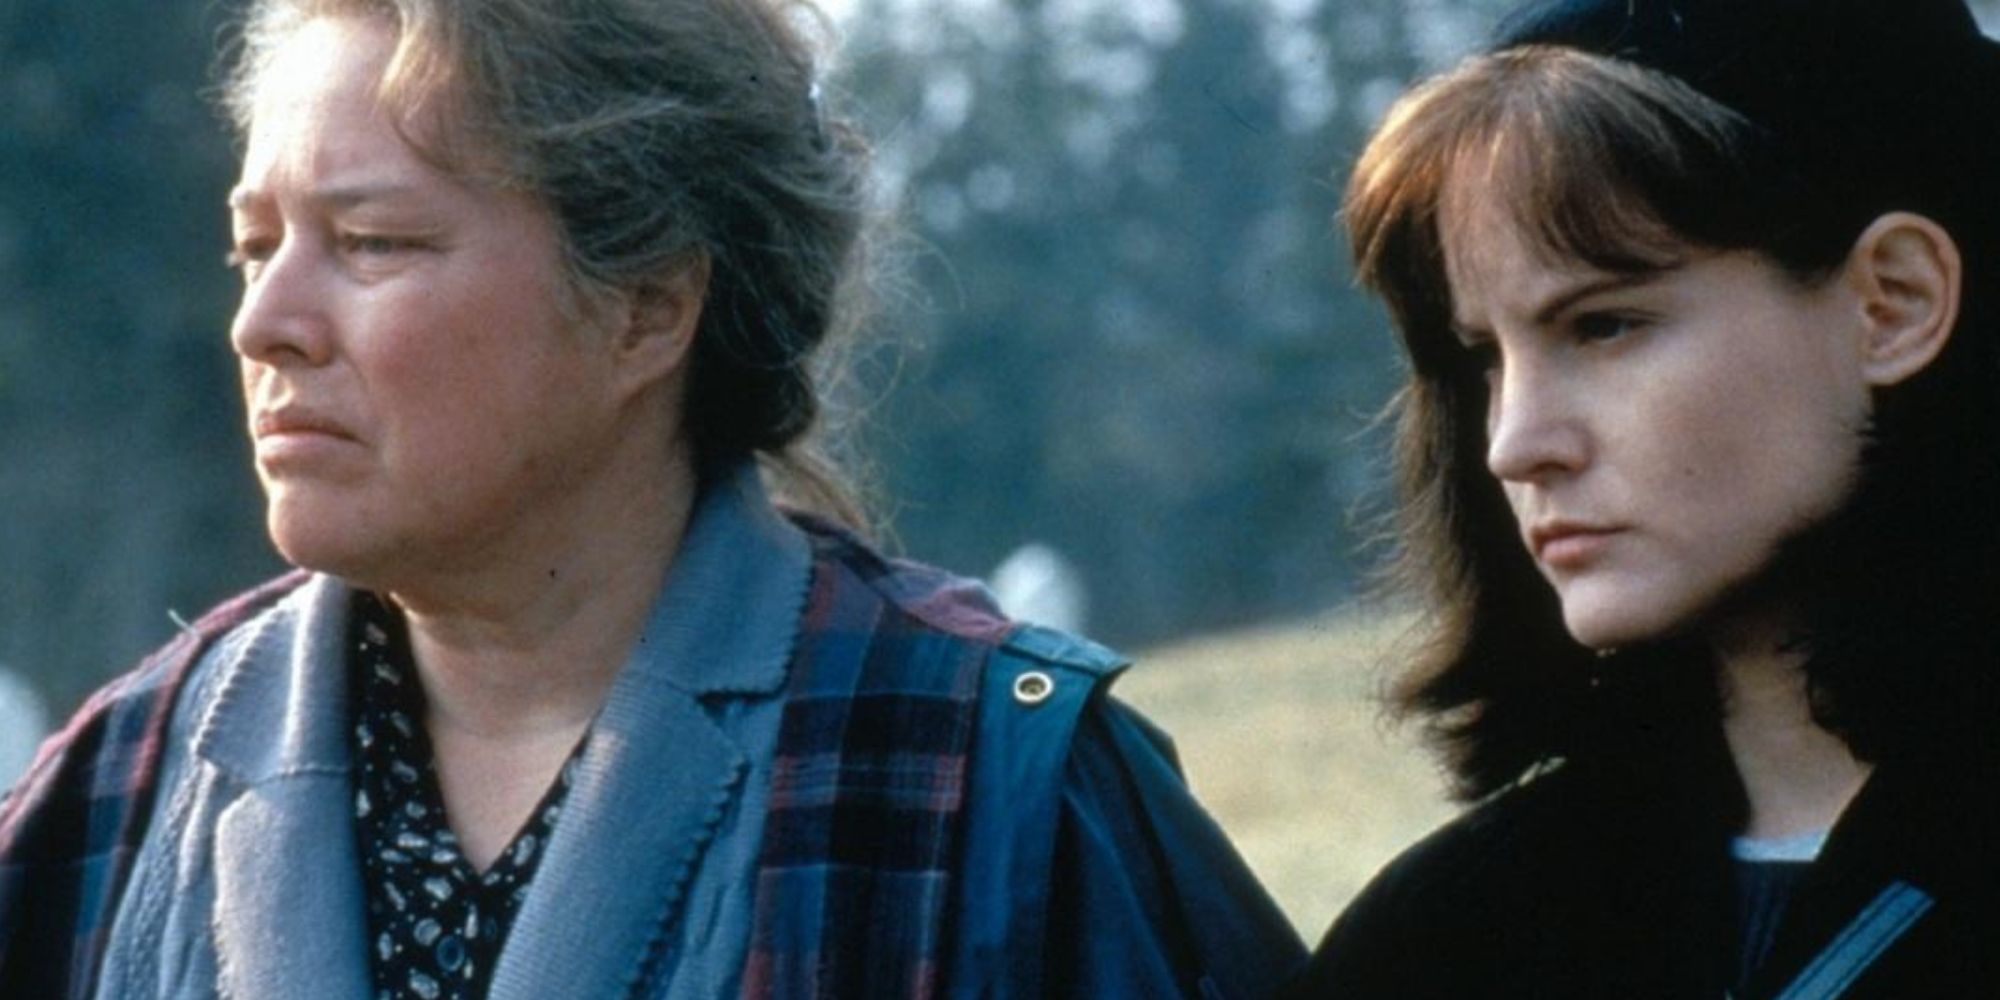 Kathy Bates and Jennifer Jason Leigh stare into the distance during a scene from the film Dolores Claiborne